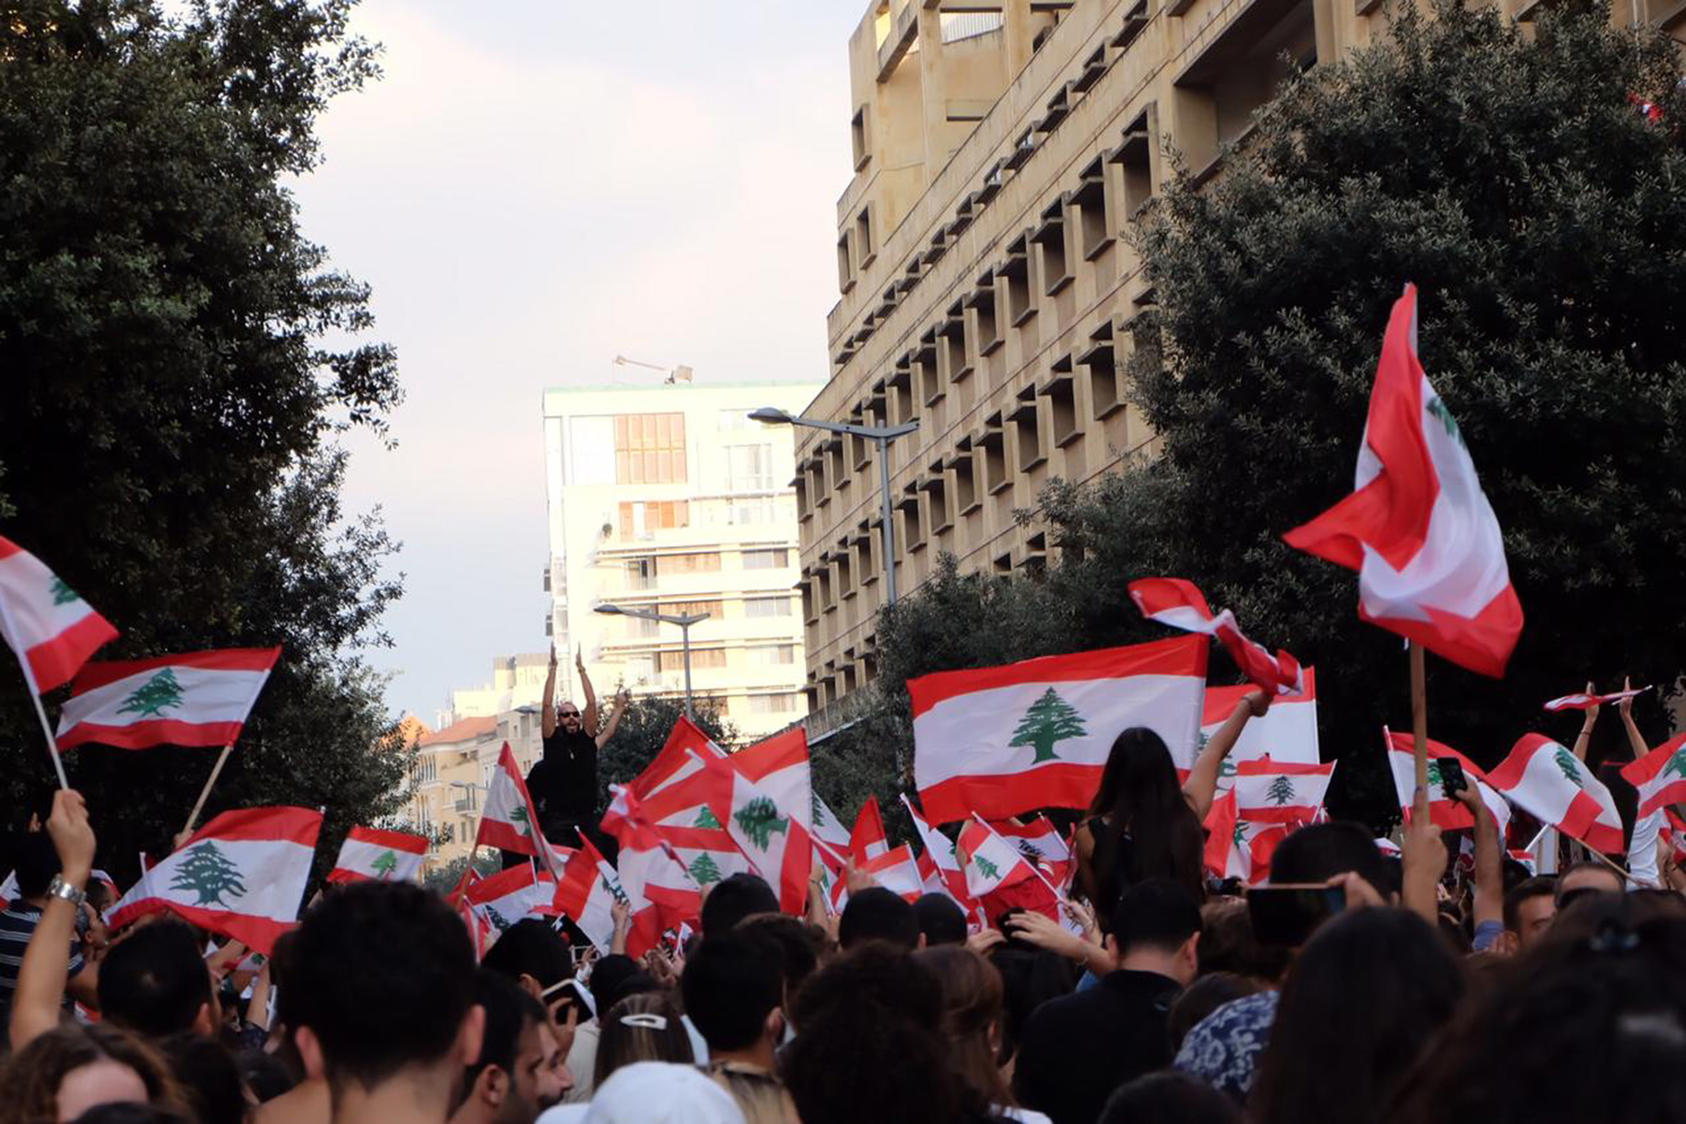 Protesters in Beirut, Oct. 19, 2019. (Shahen Araboghlian/Wikimedia Commons)